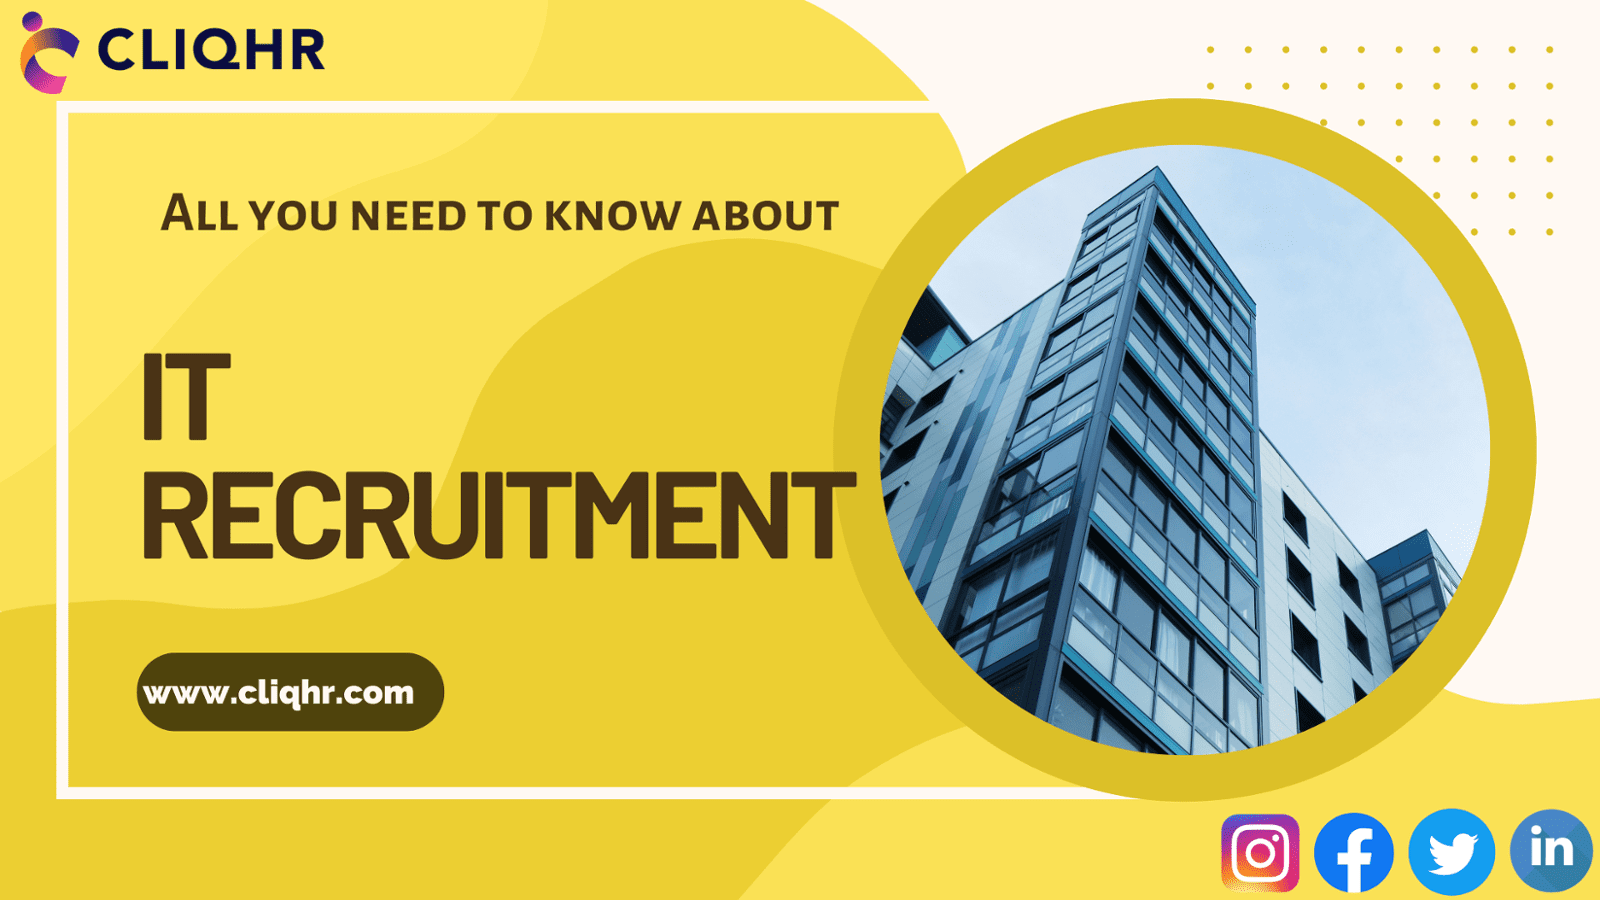  All you need to know about IT Recruitment